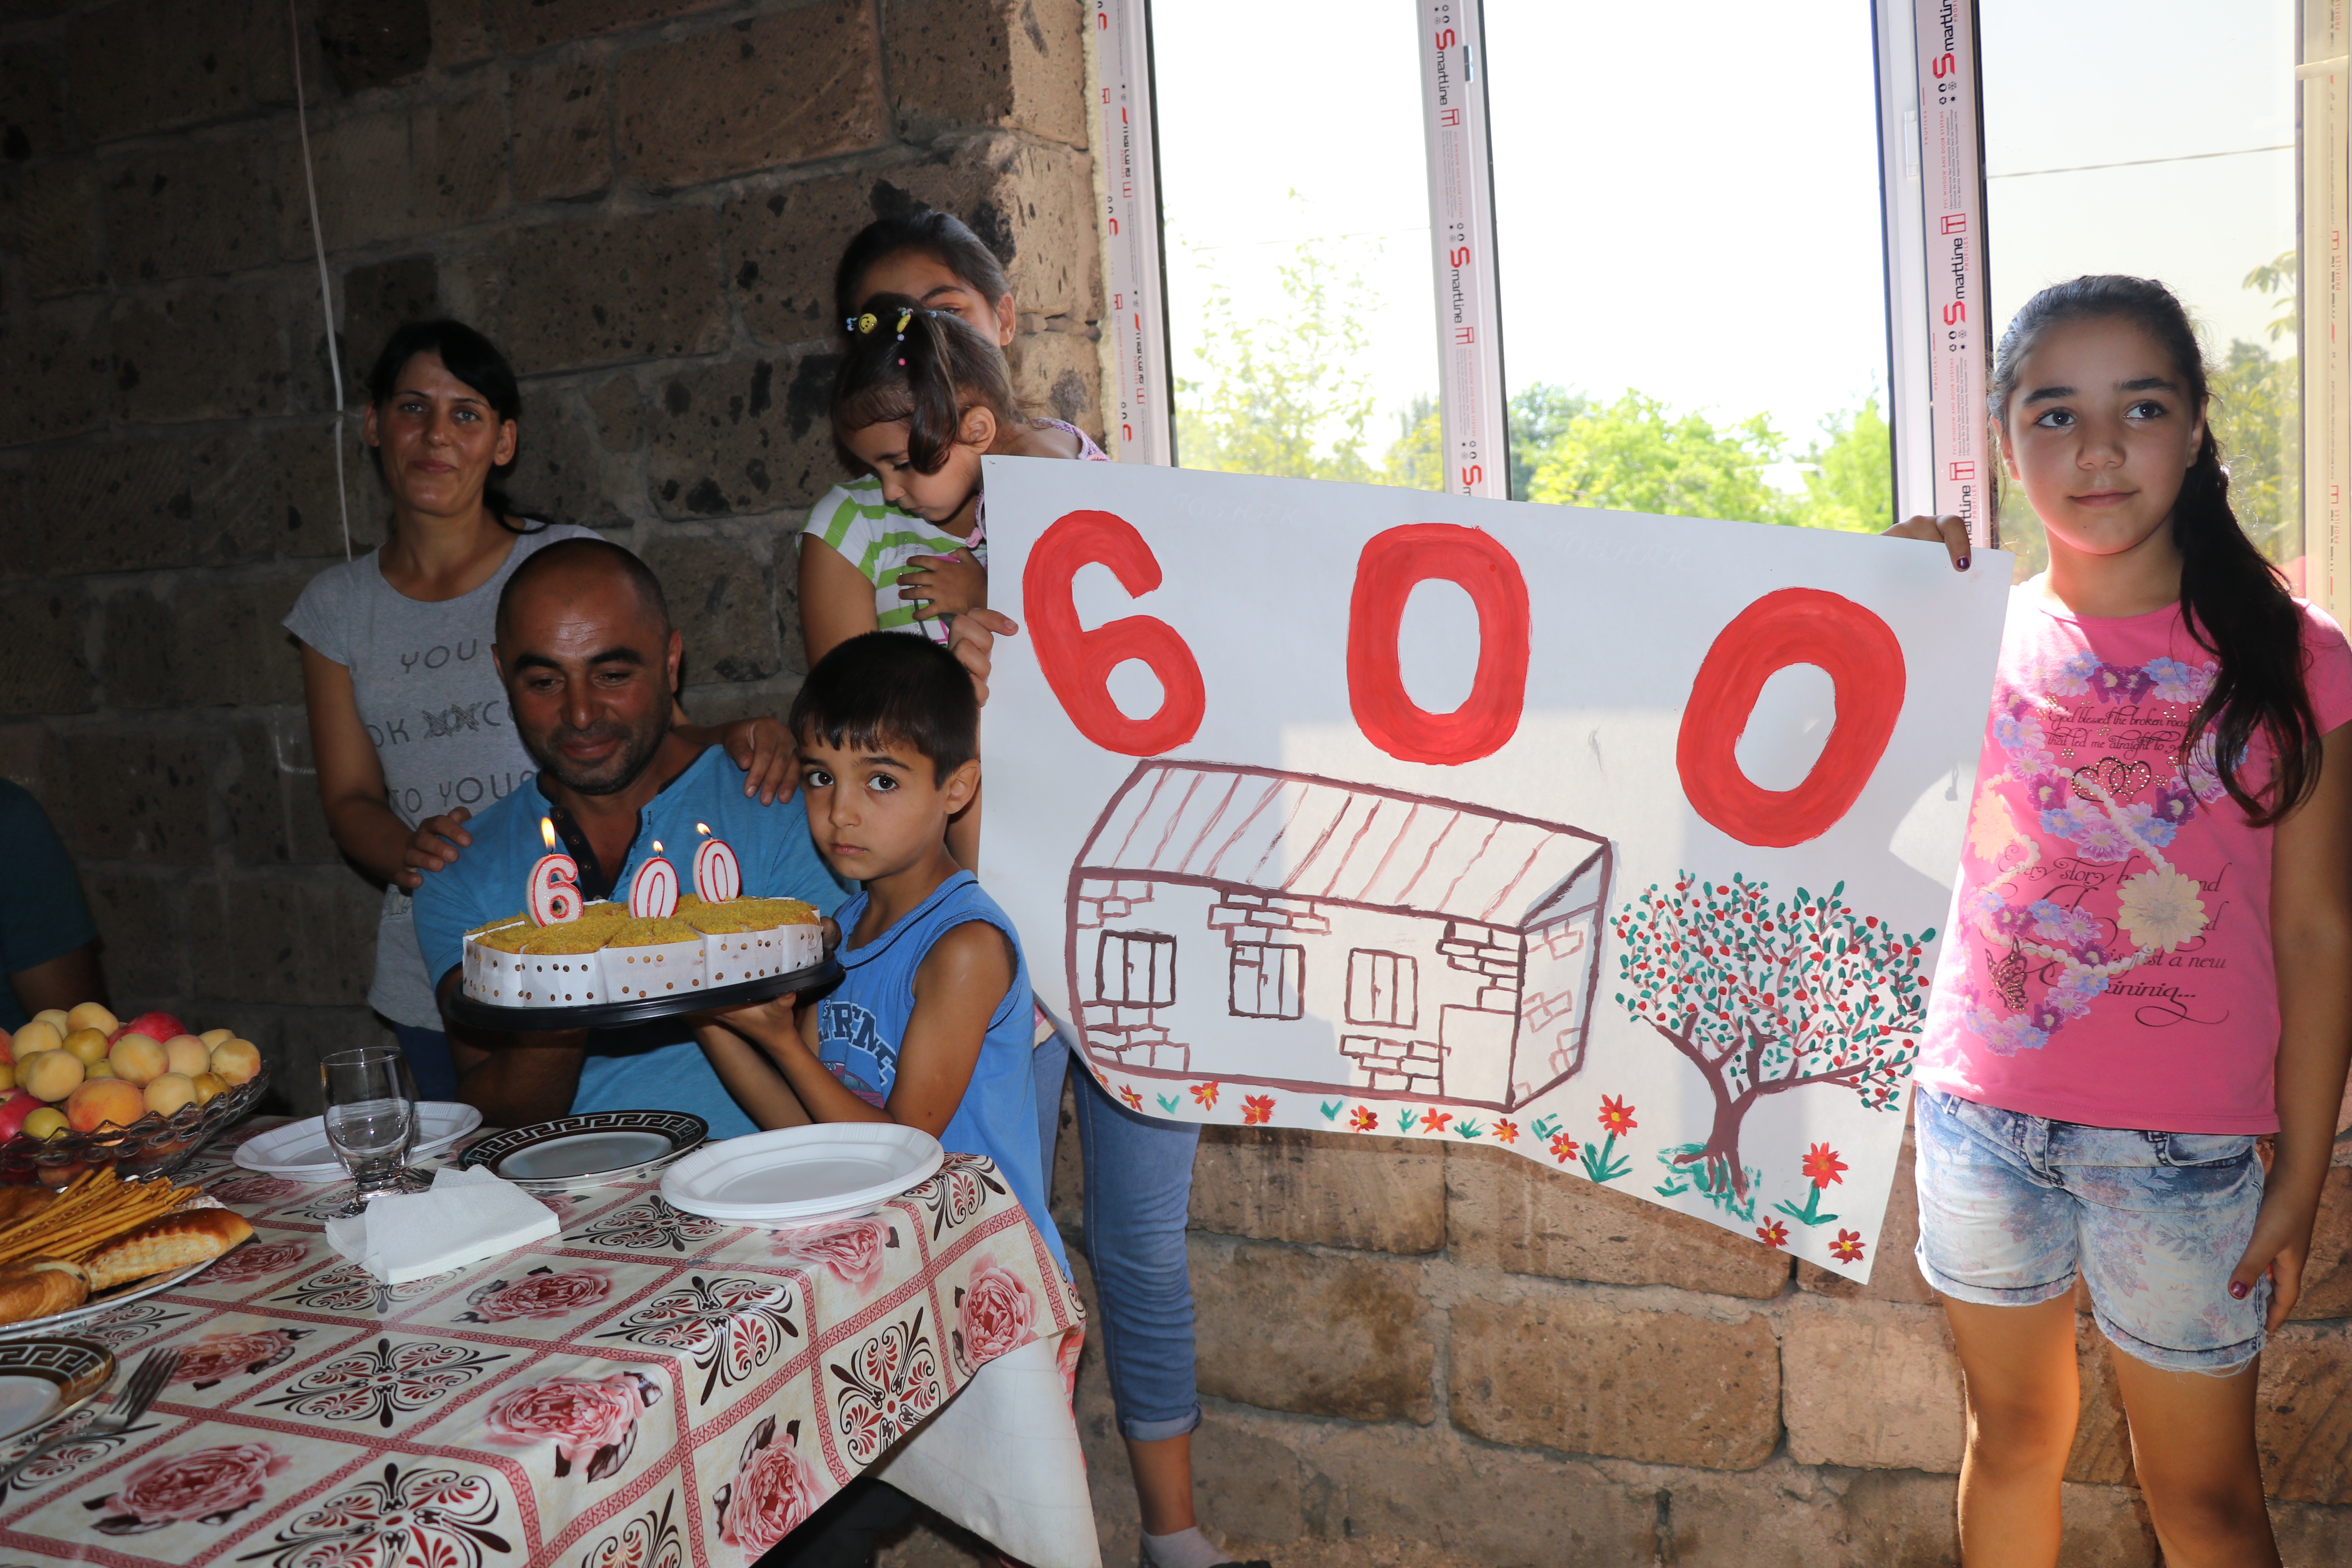 600th Home Building Milestone with Christian Youth Mission to Armenia (CYMA)